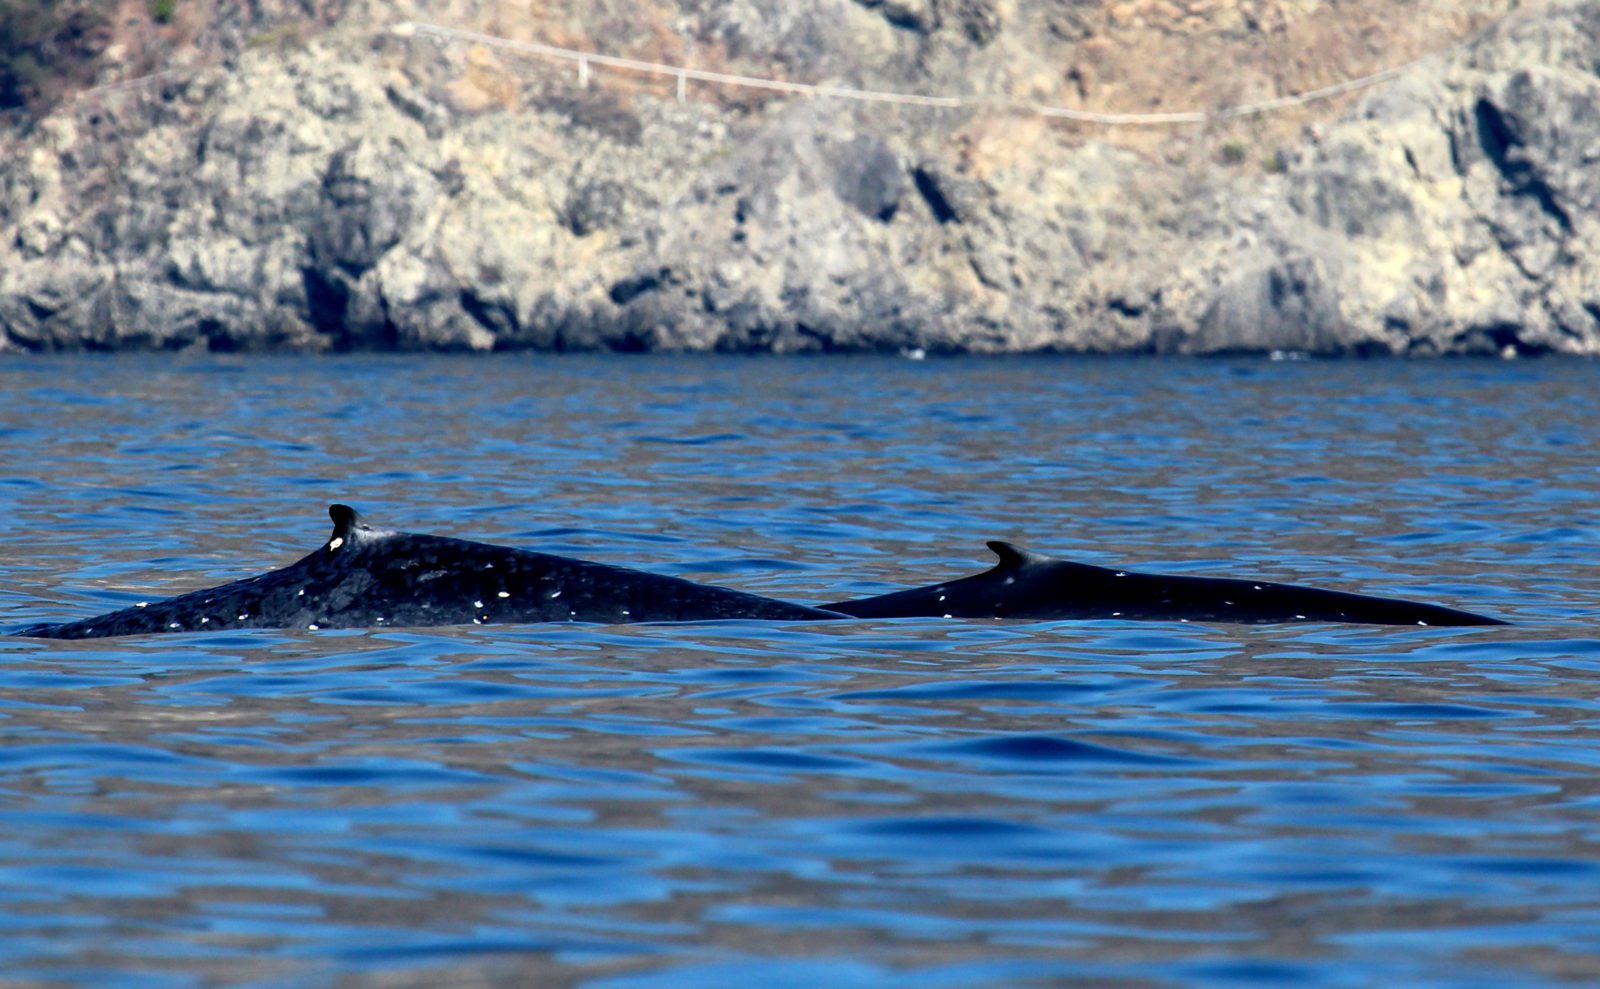 Blue whale with calf | Photo: Jen Craighill